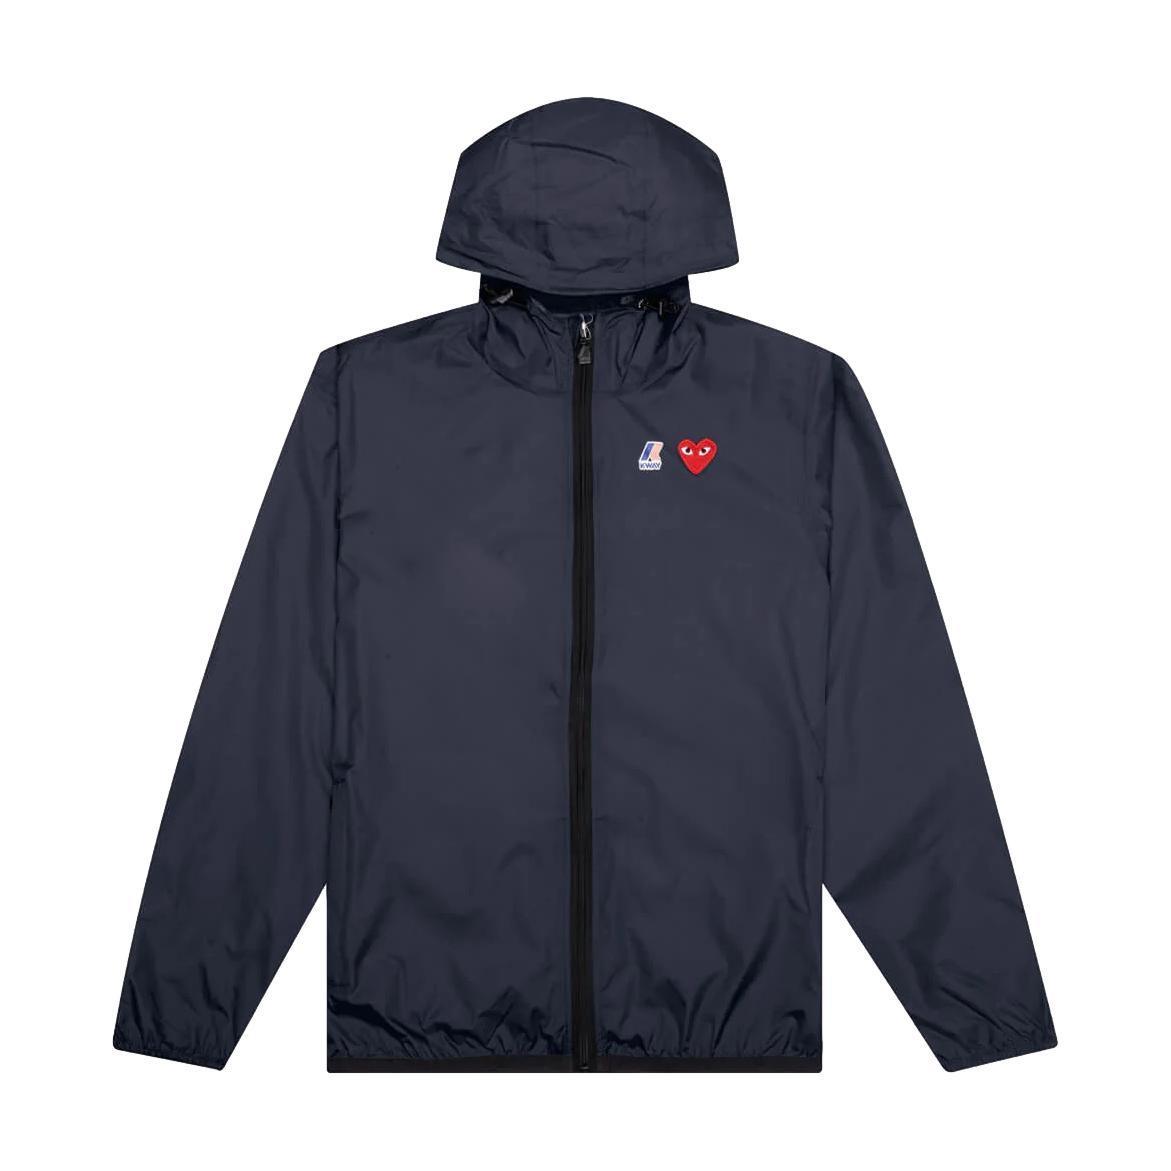 CDG PLAY KWAY HOODED JACKET NAVY - Gravity NYC